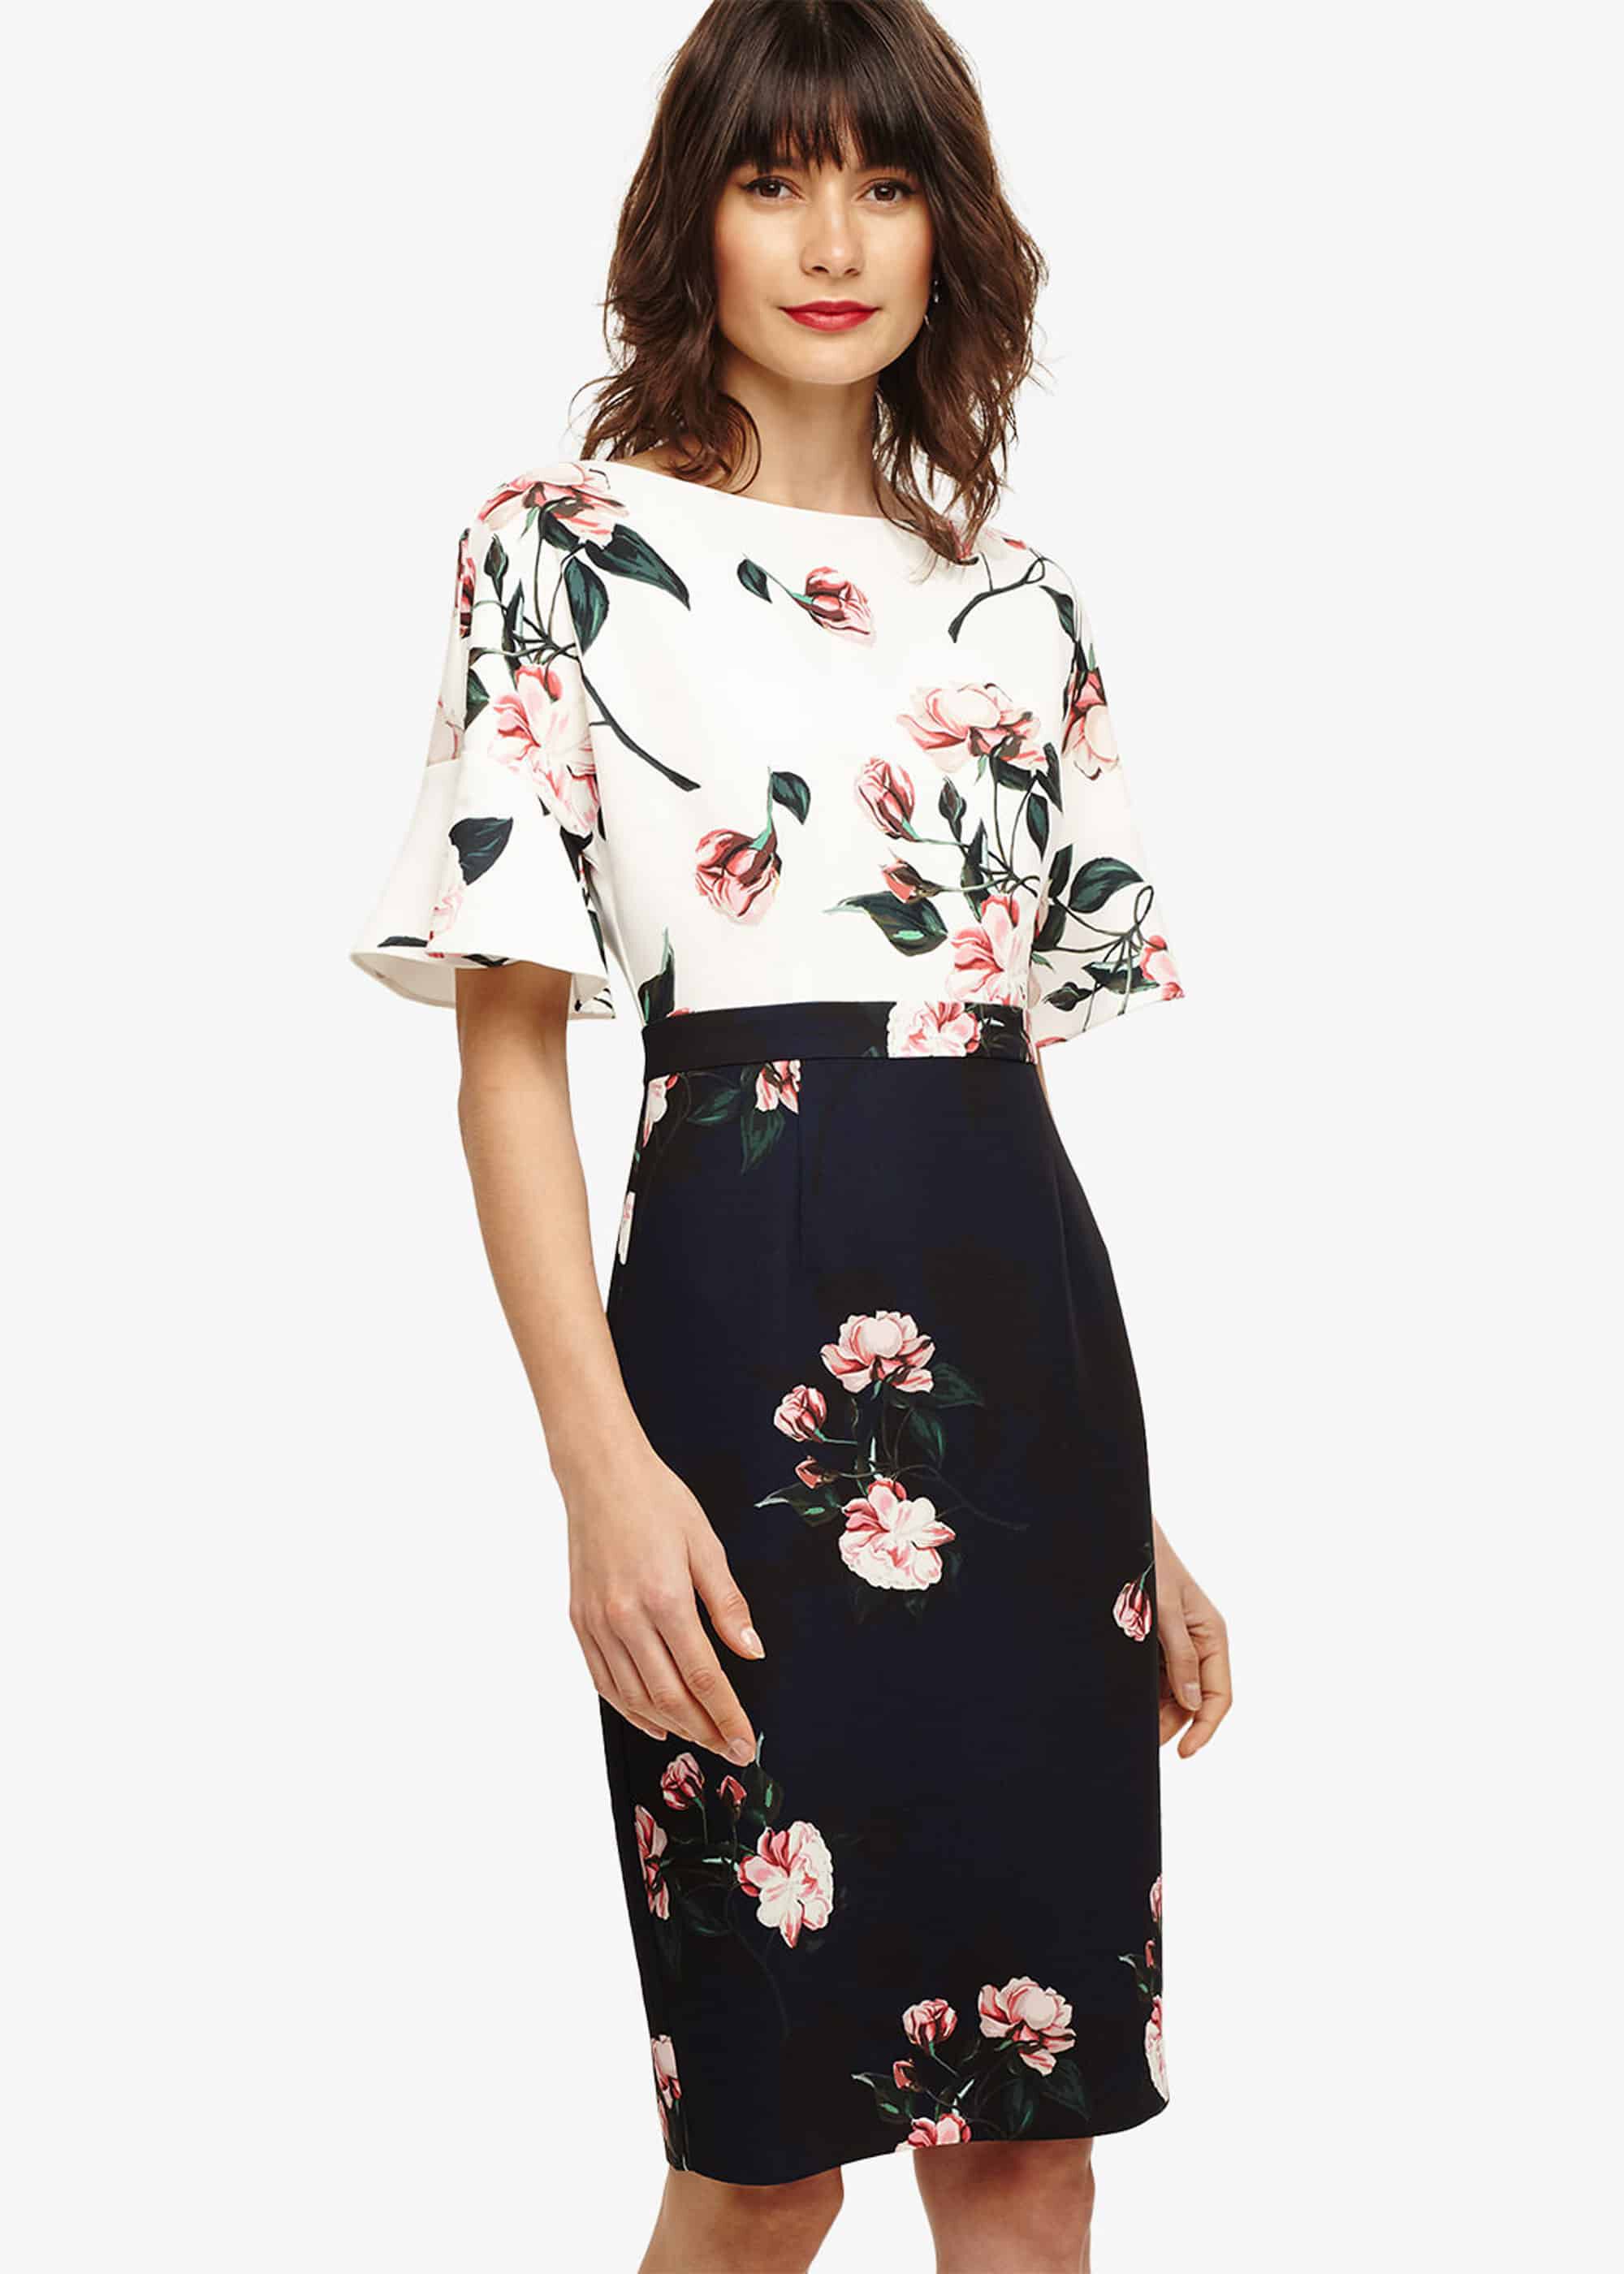 Heather Floral Dress | Phase Eight